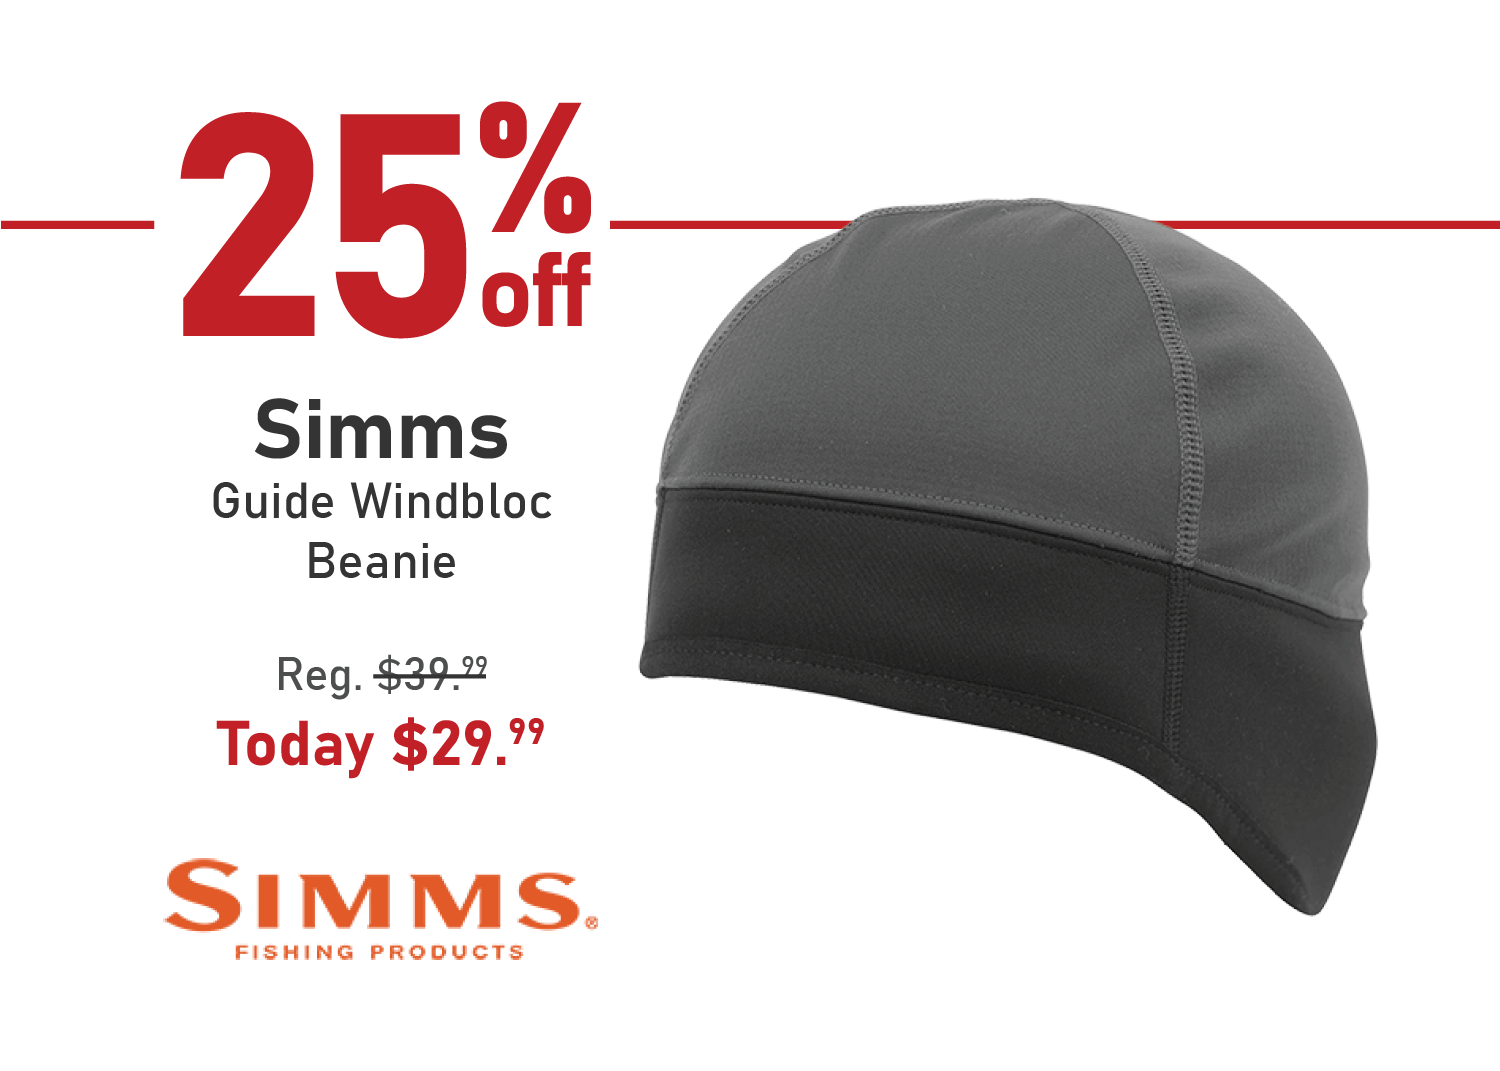 Save 25% on the Simms Guide Windbloc Beanie